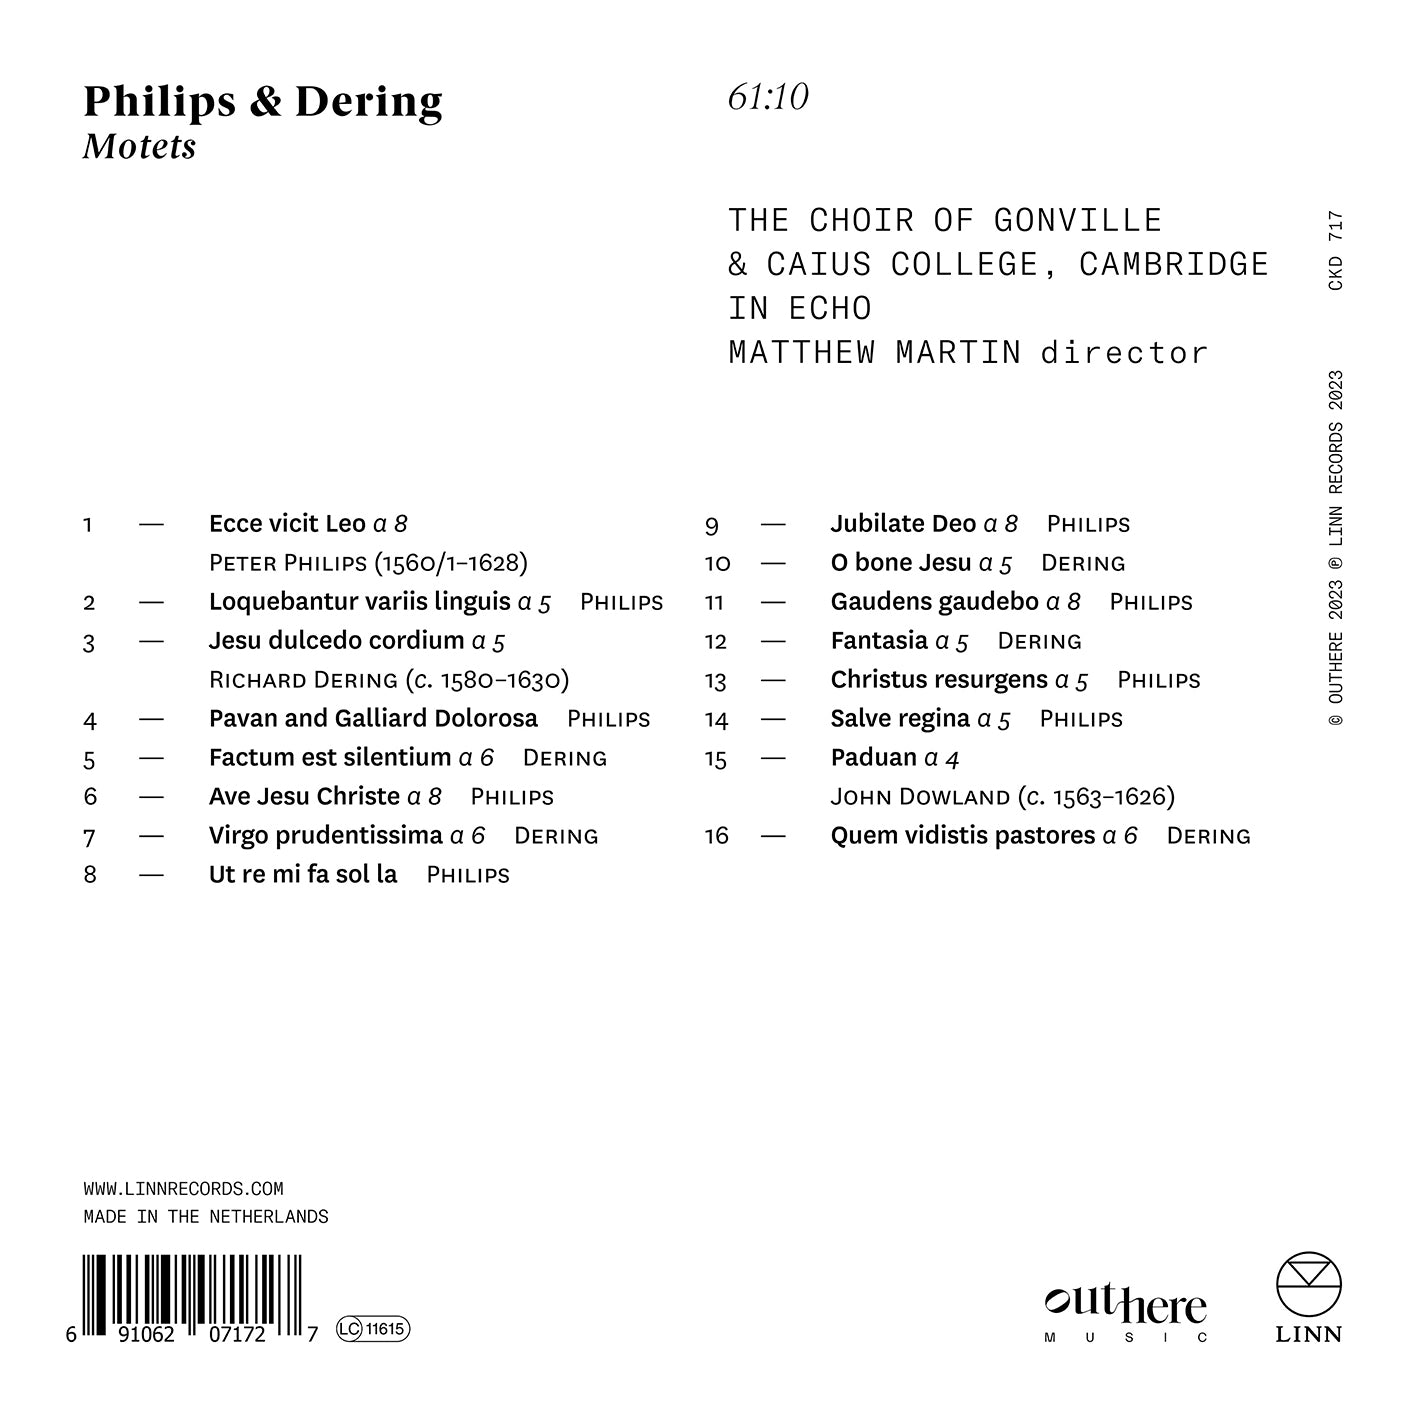 Philips & Dering: Motets